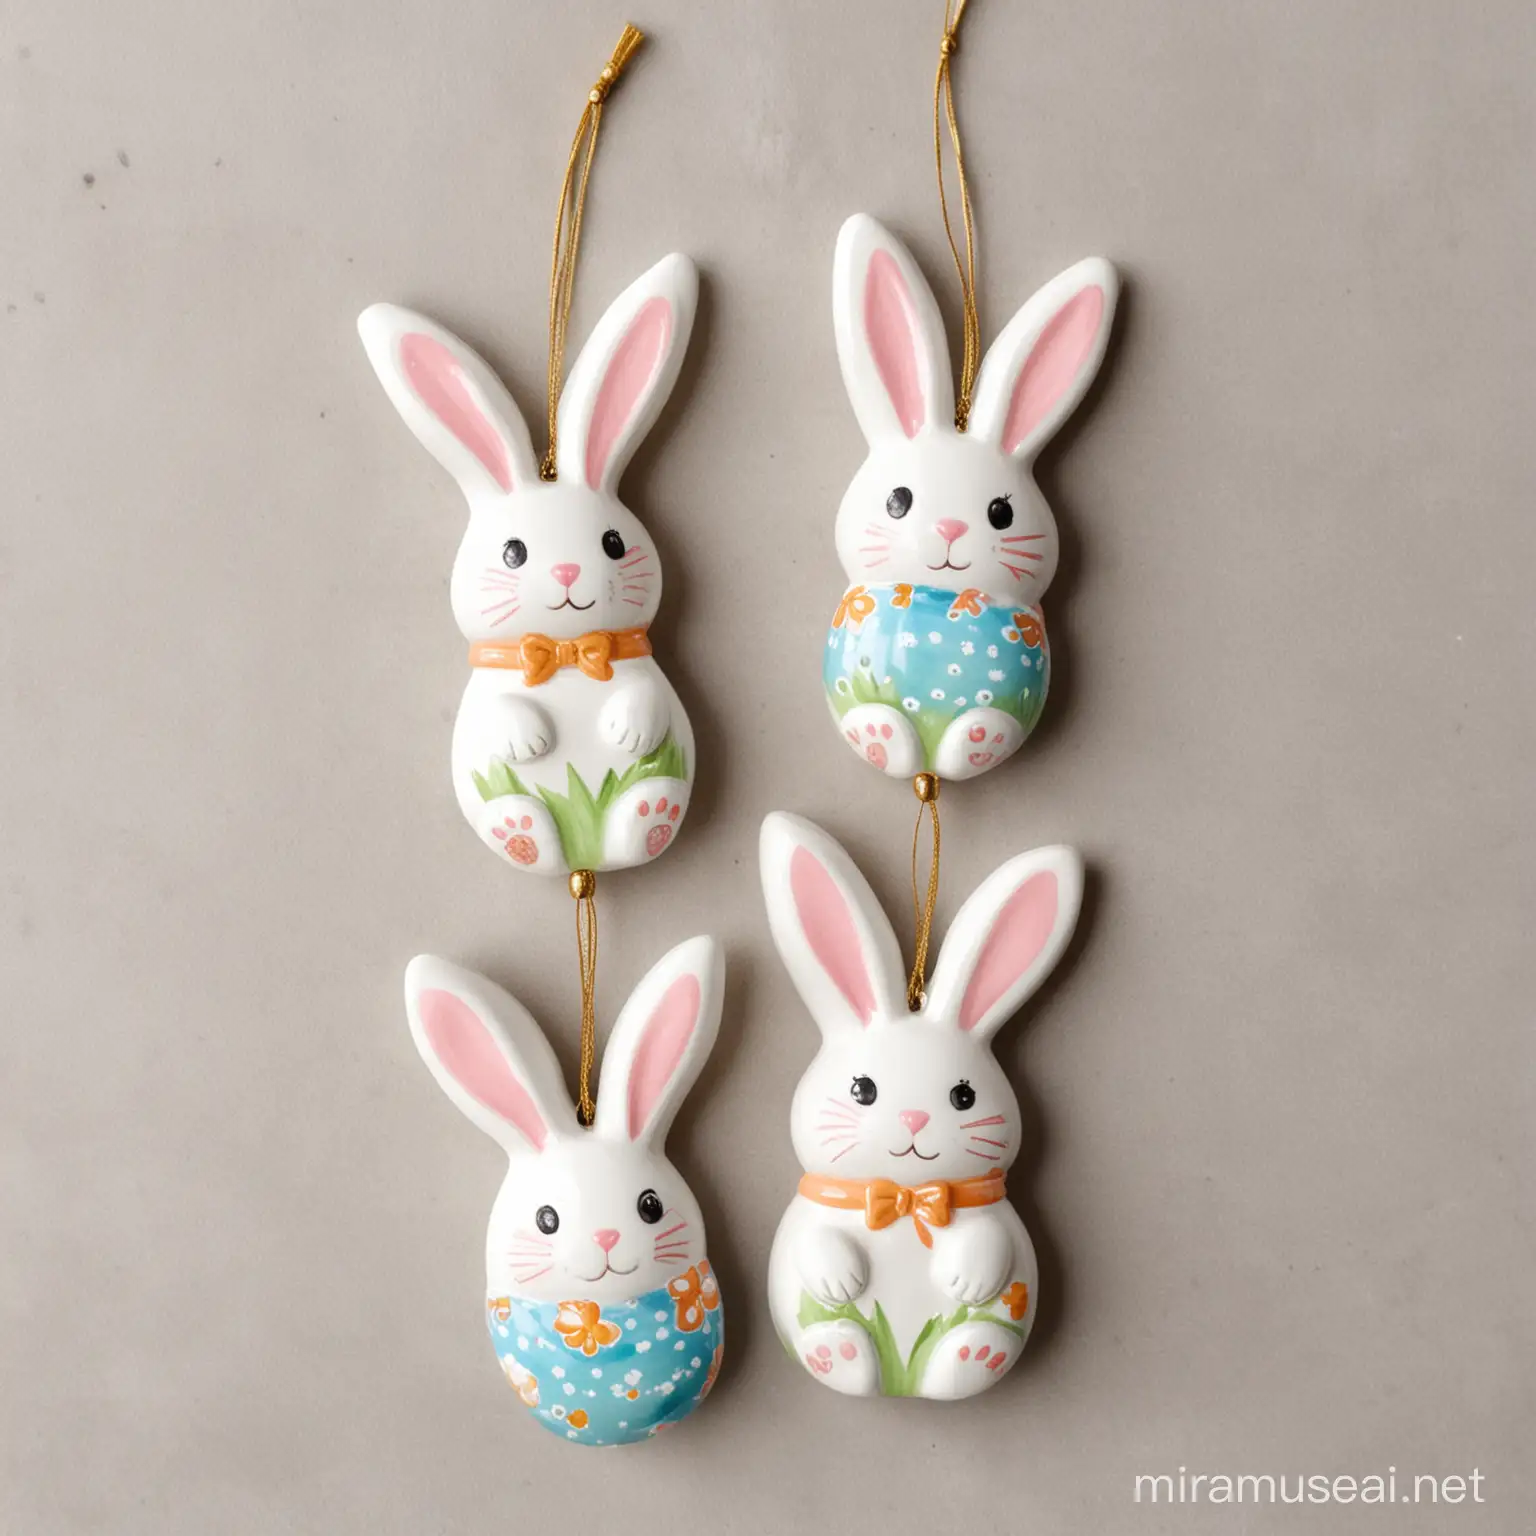 Adorable Easter Bunny Ceramic Ornaments on a White Background